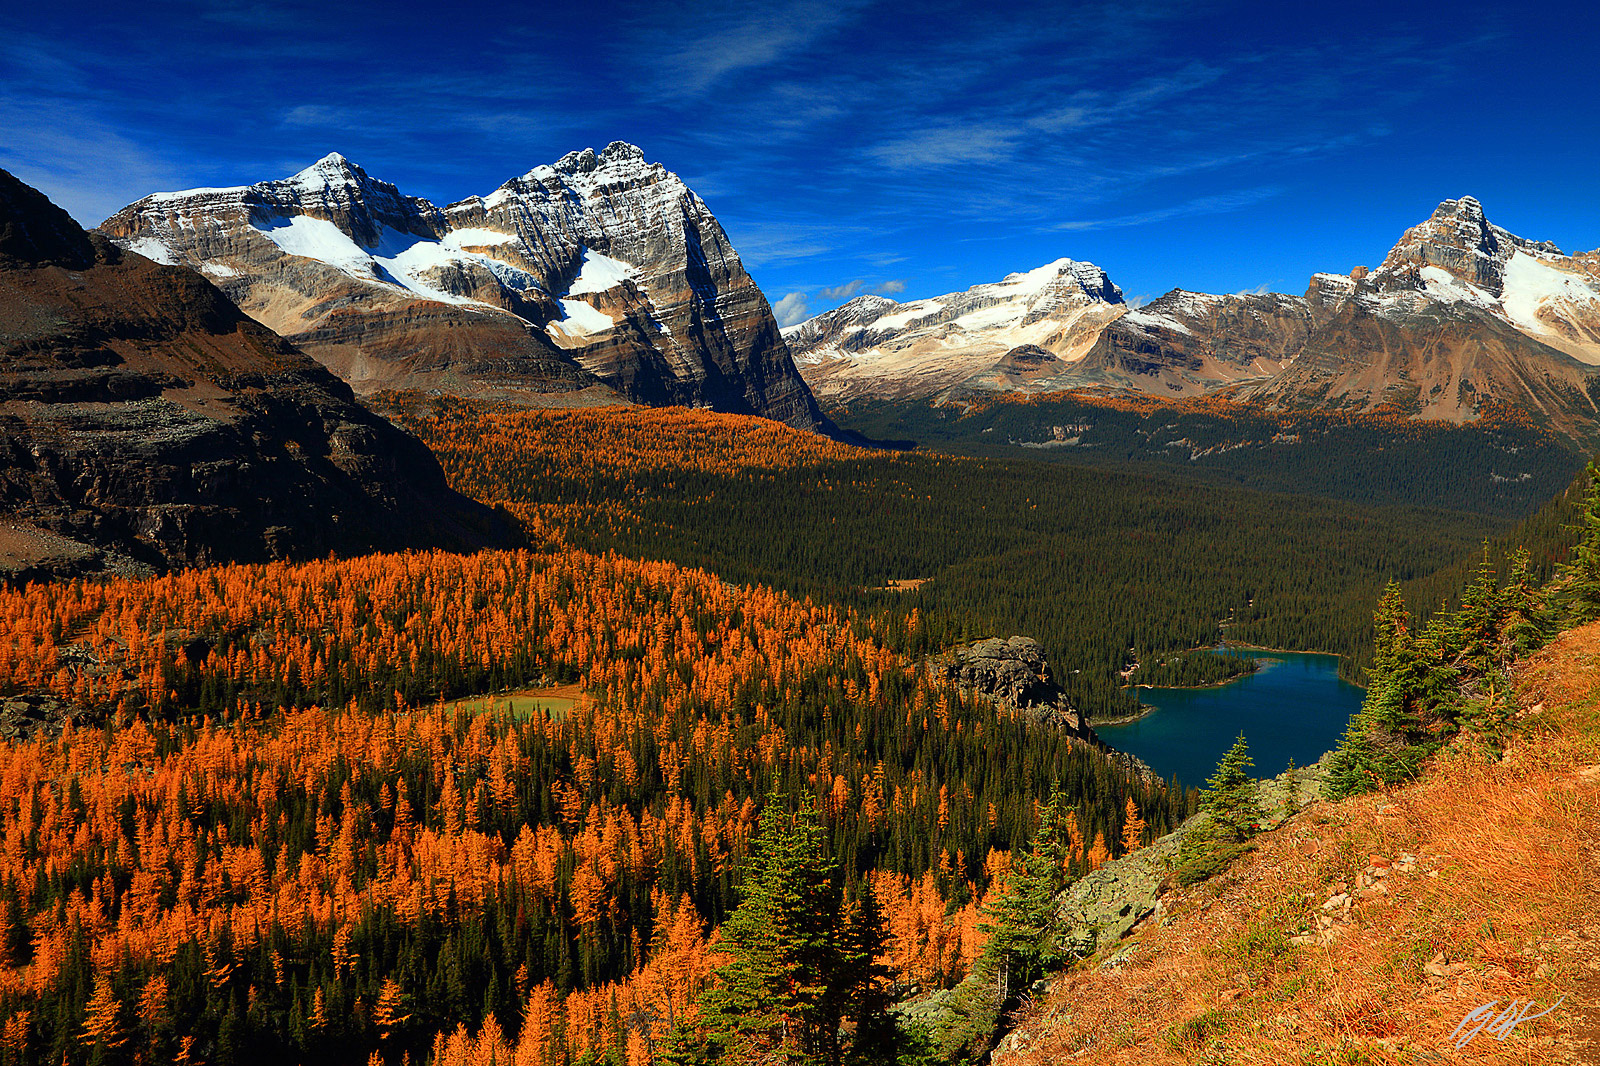 Golden Larch and Odaray Peak in the Lake O'Hara Region of Yoho National Park in Canada